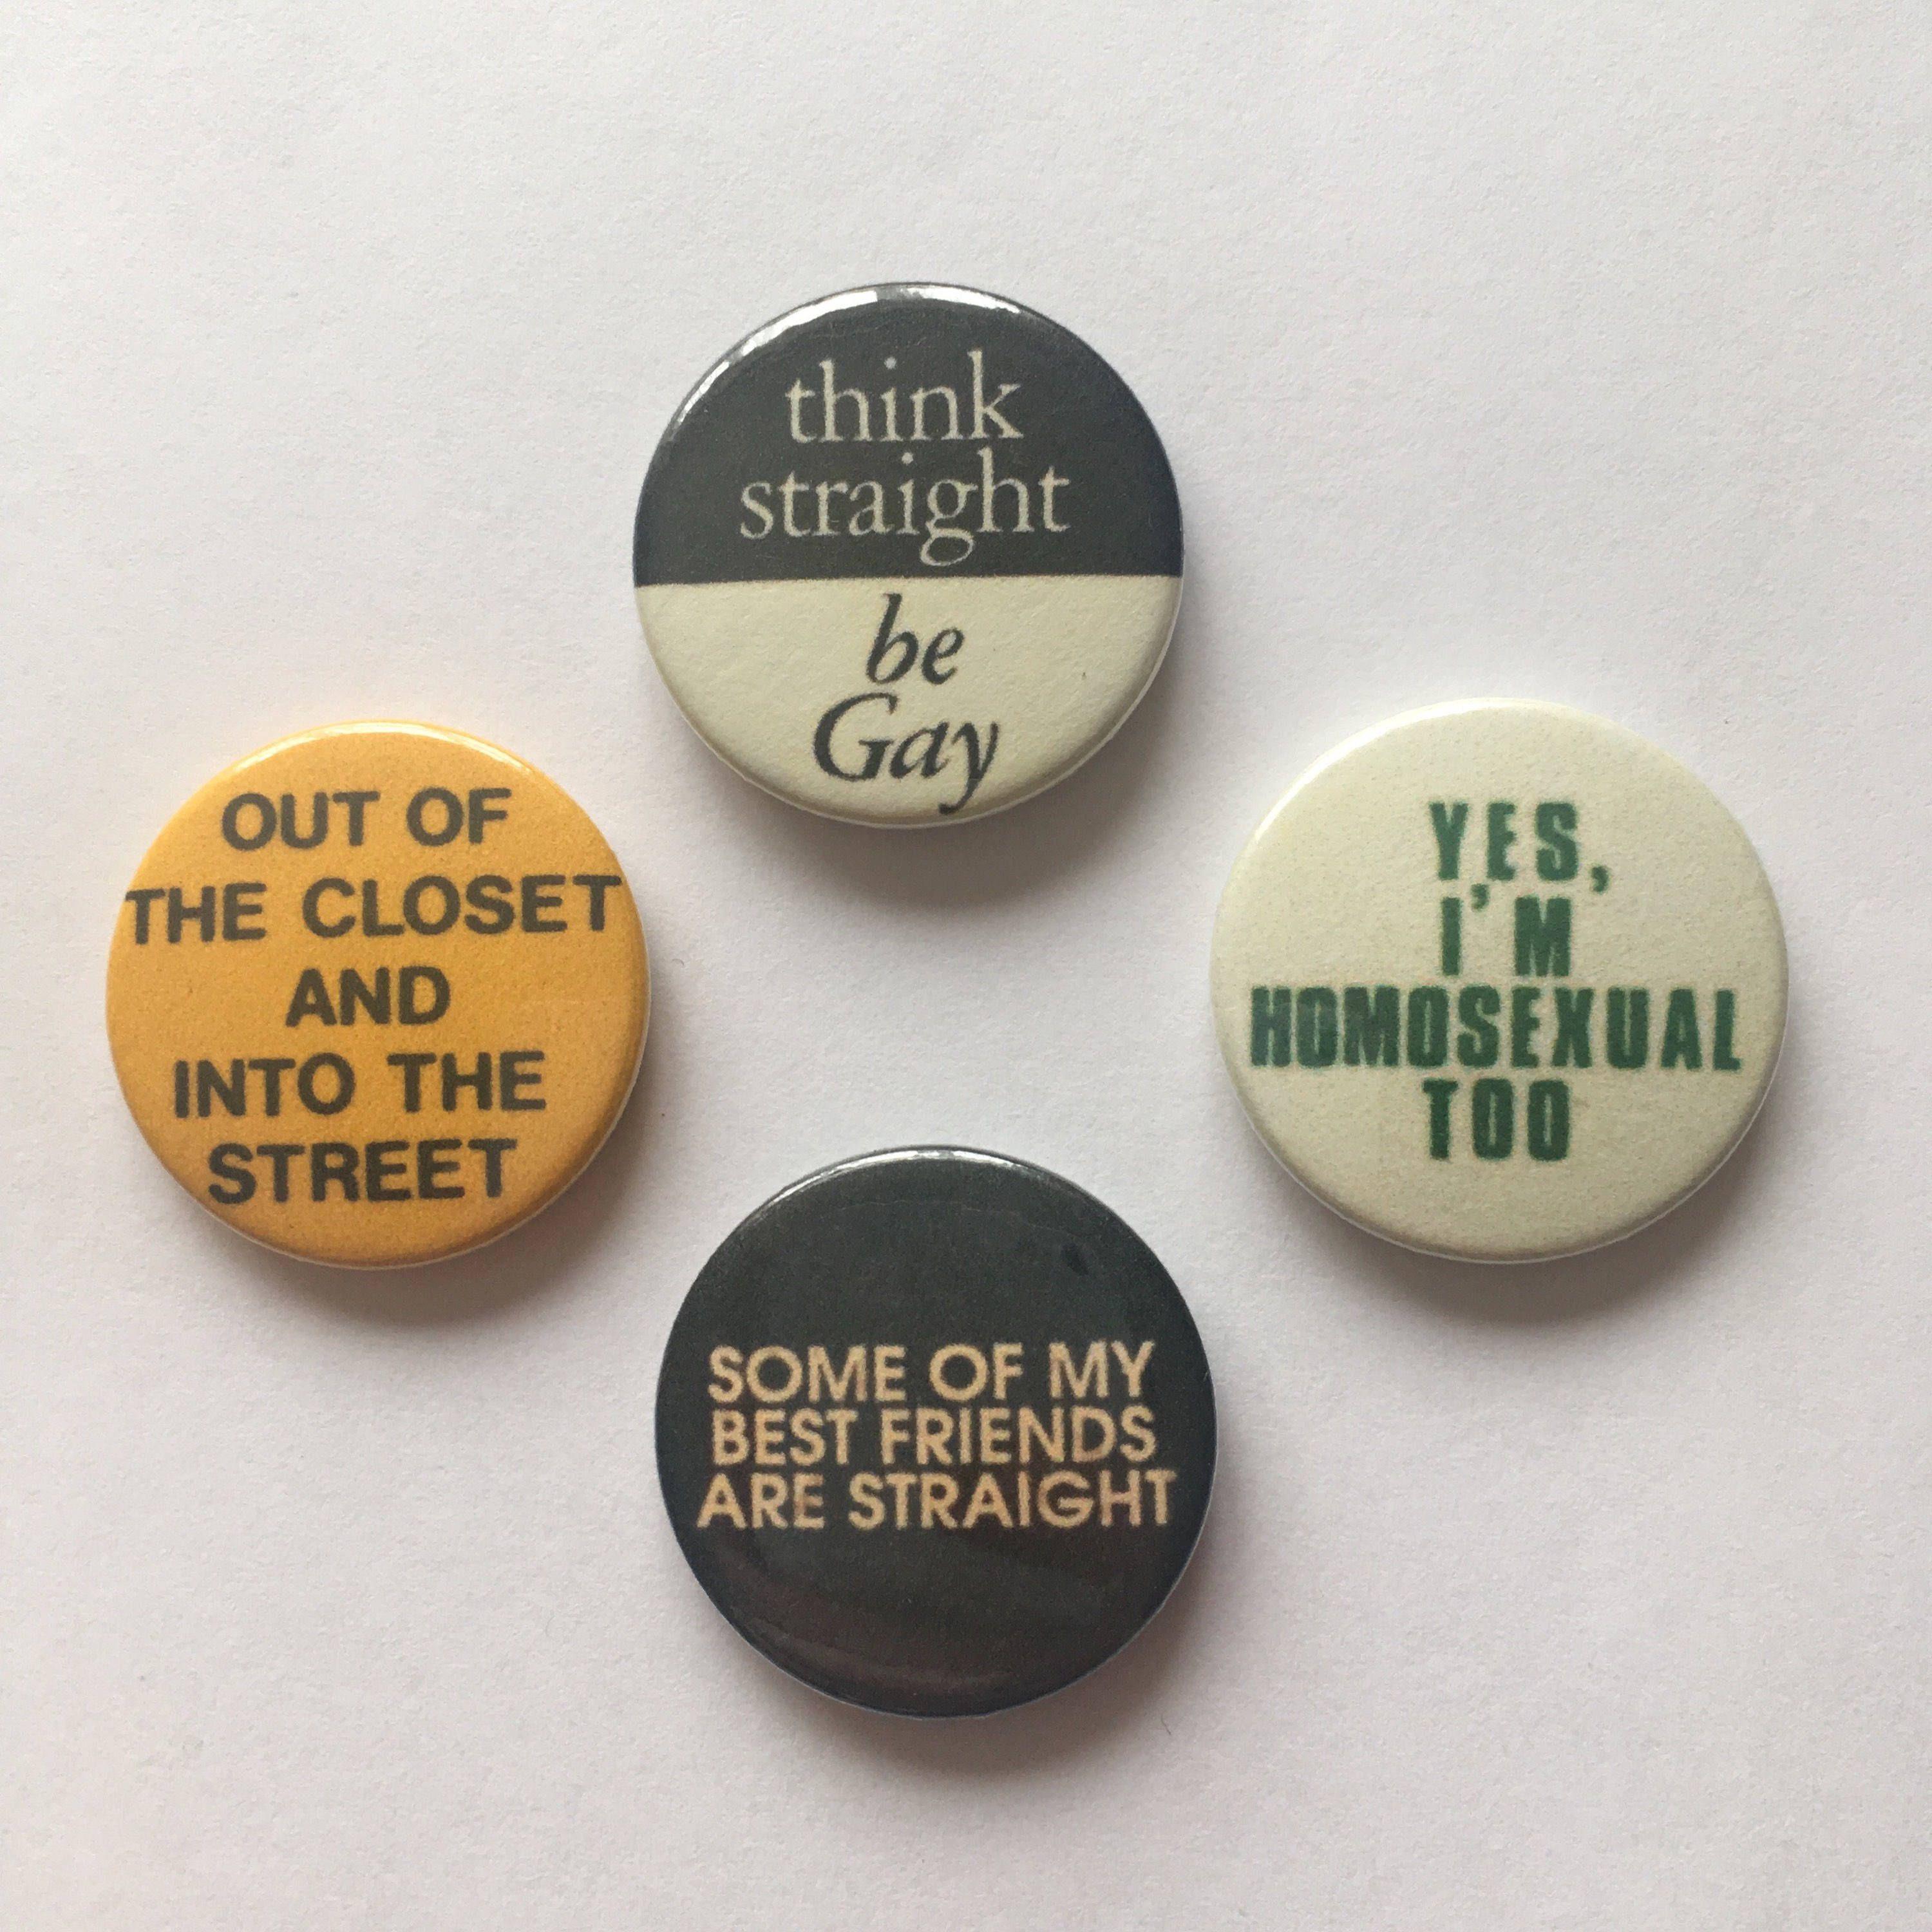 Finch reccomend Gay pride buttons